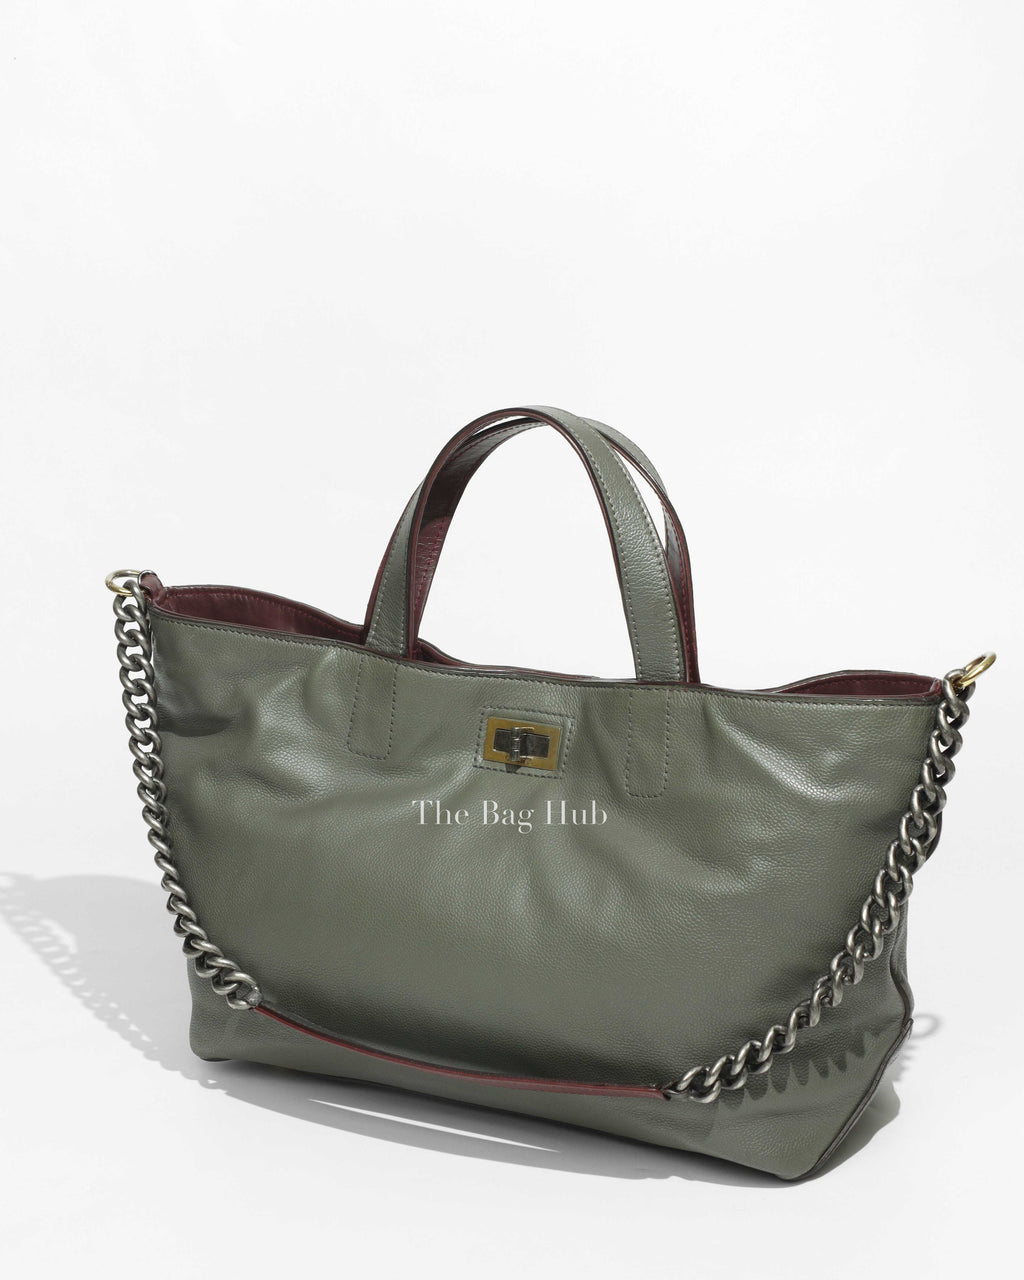 Chanel Olive Mademoiselle 2.55 2-way Tote Bag